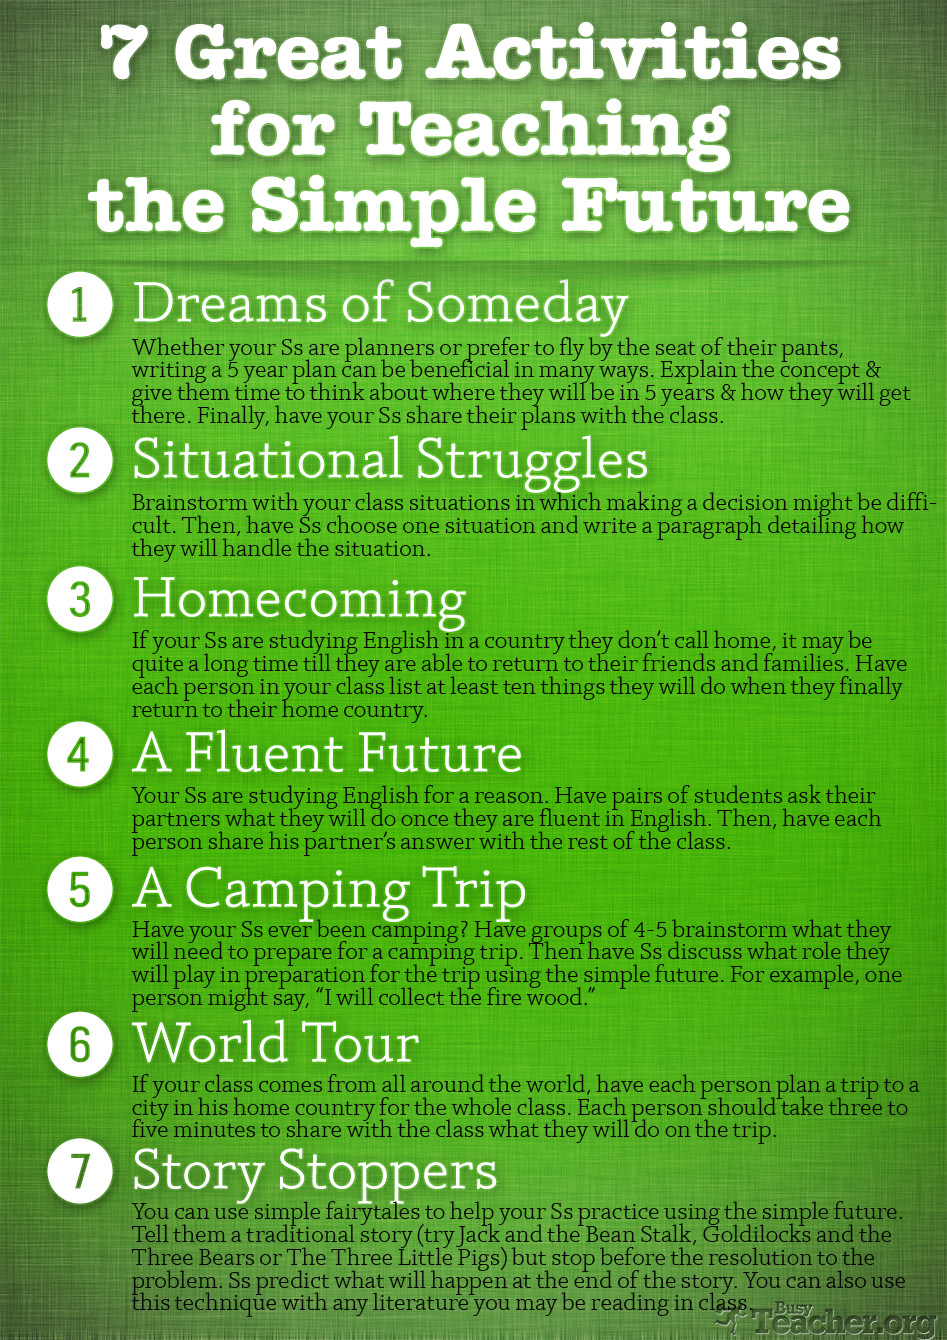 7 Great Activities to Teach the Simple Future: Poster